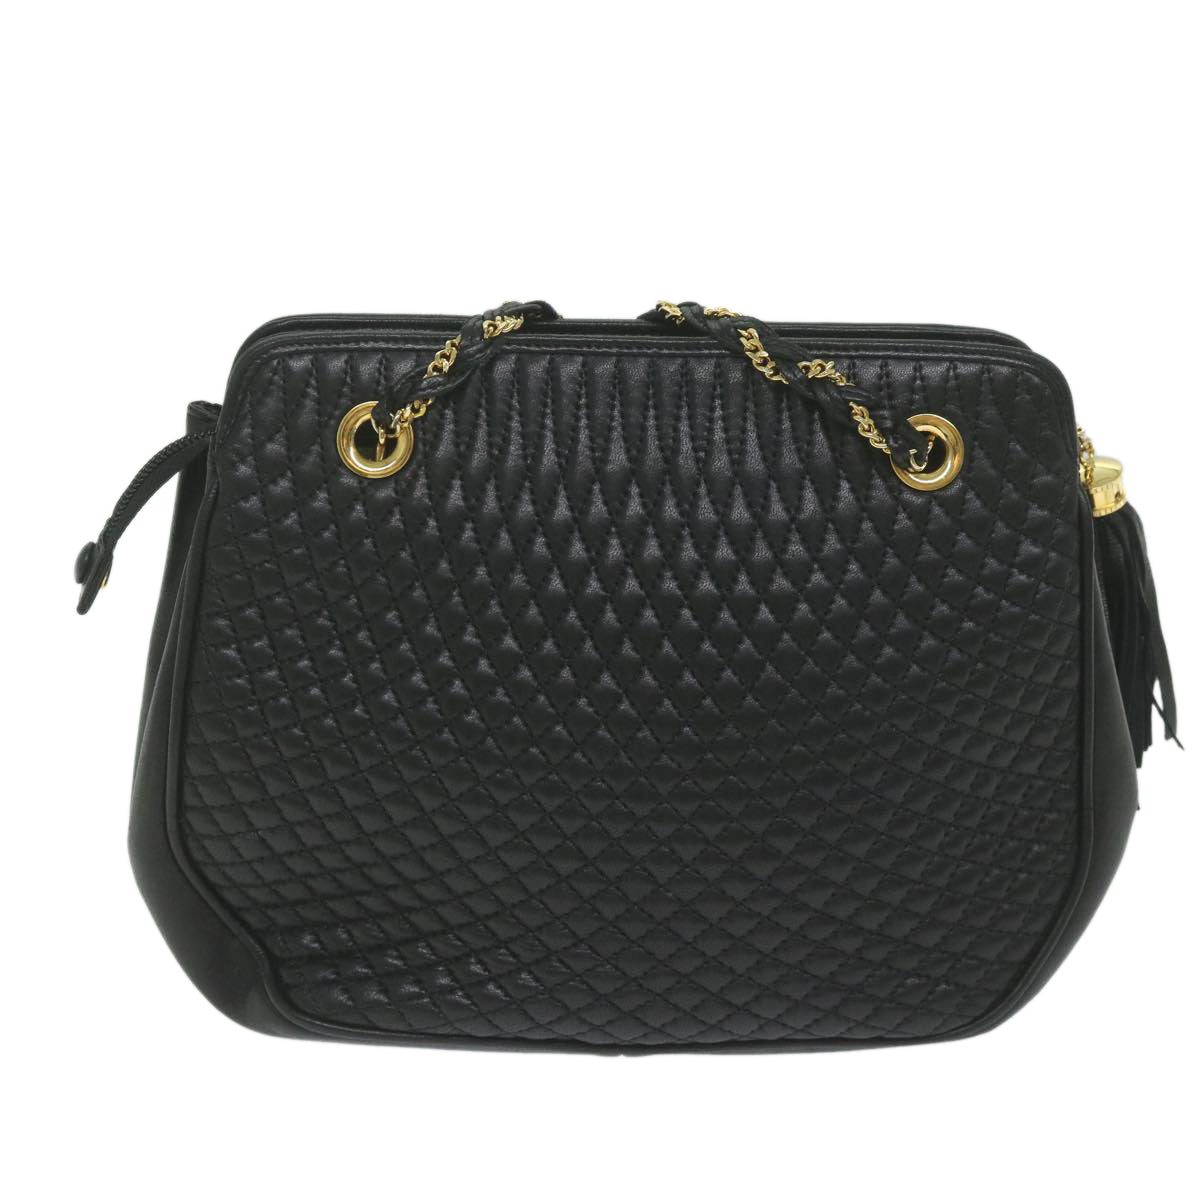 BALLY Quilted Chain Shoulder Bag Leather Black Auth yb484 - 0